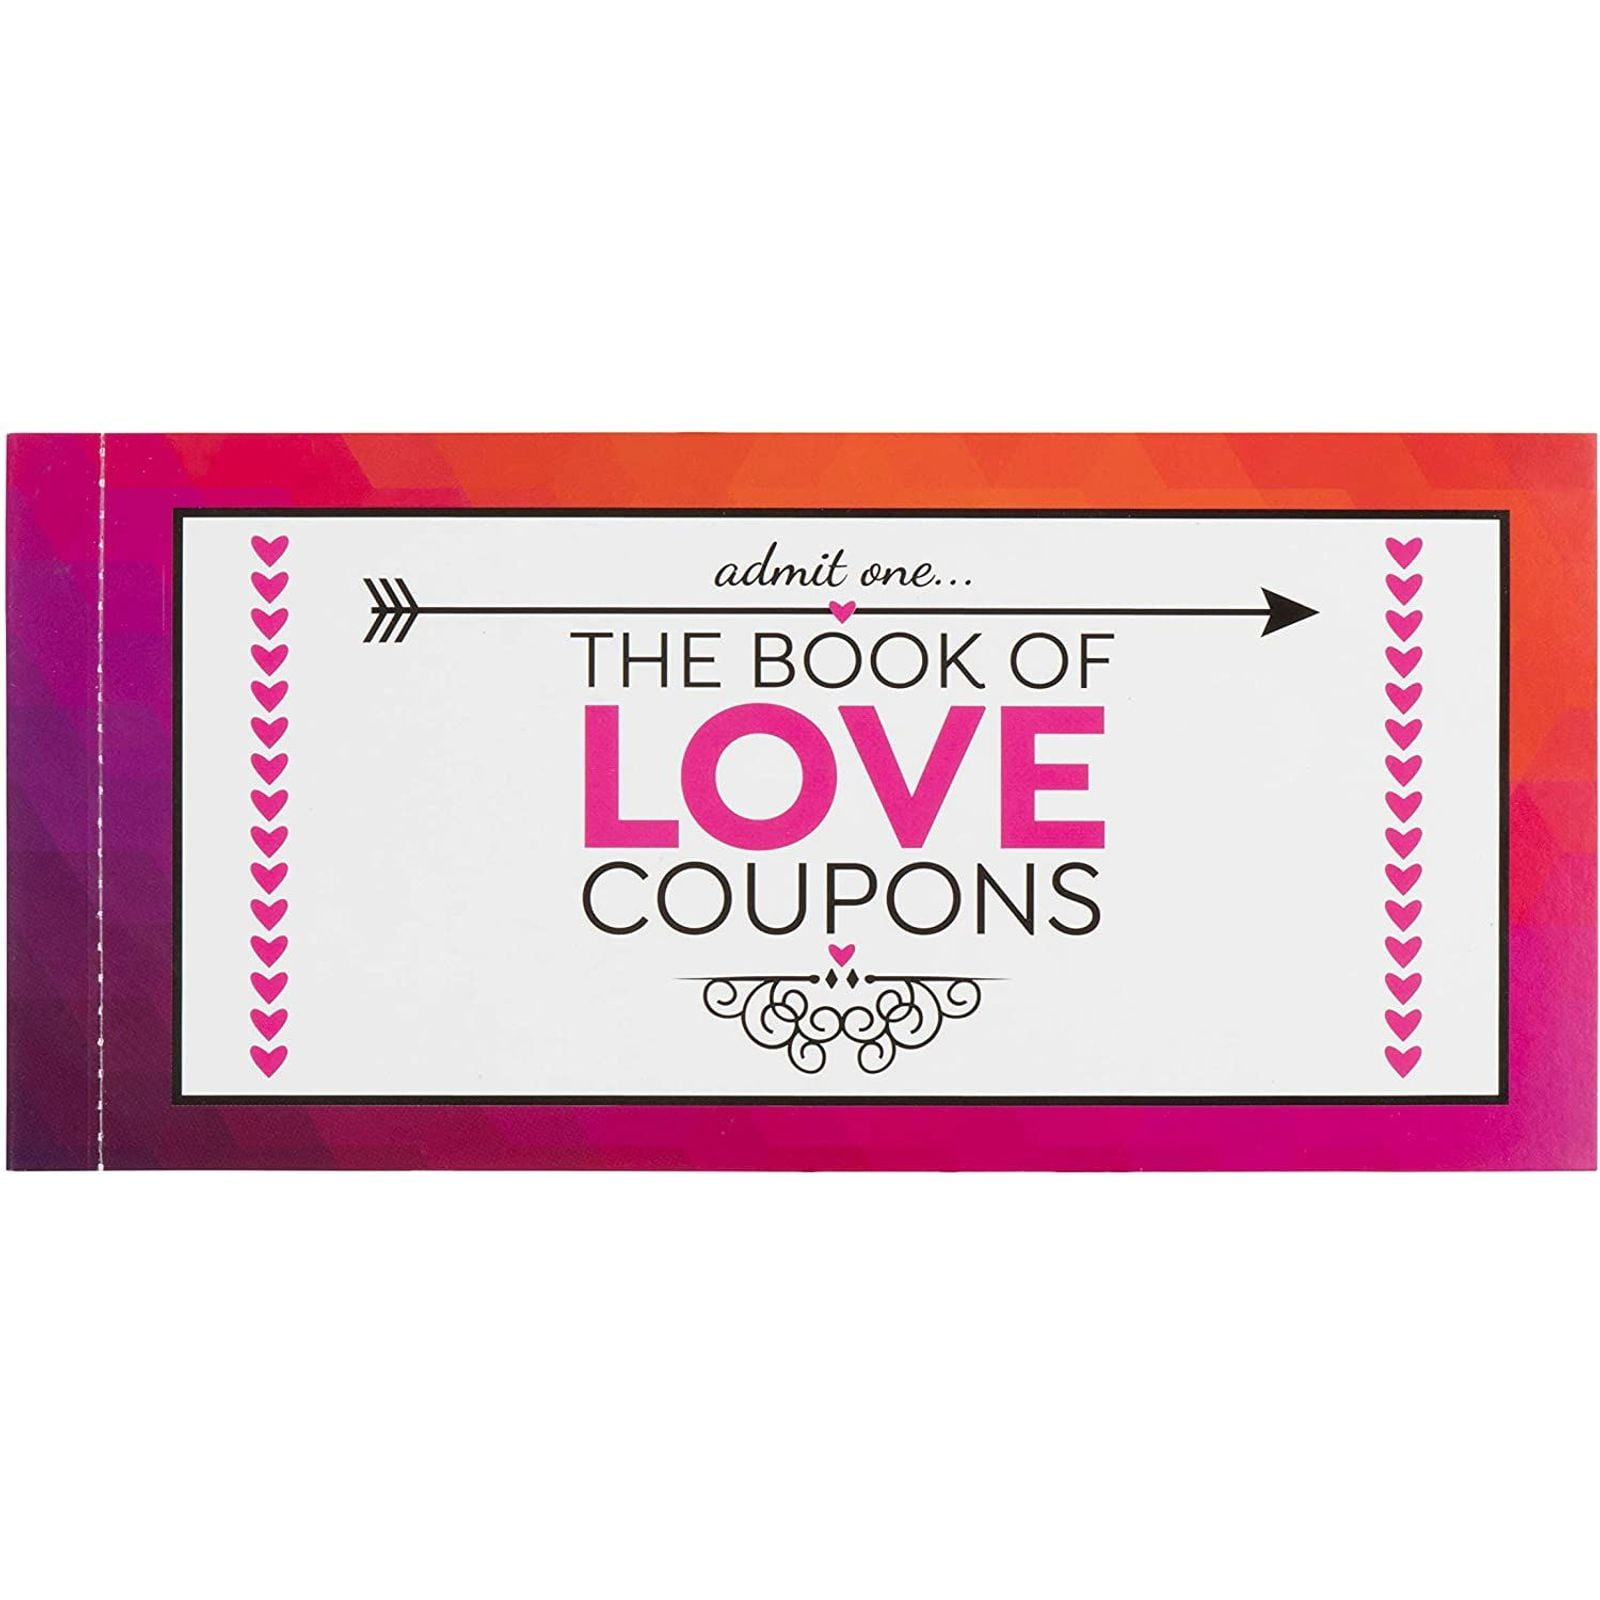 Valentines Day Love Coupons Gift for Her - 20 Naughty Sex Coupons Book for Wife, Girlfriend and Couples, 6 X 4 inches